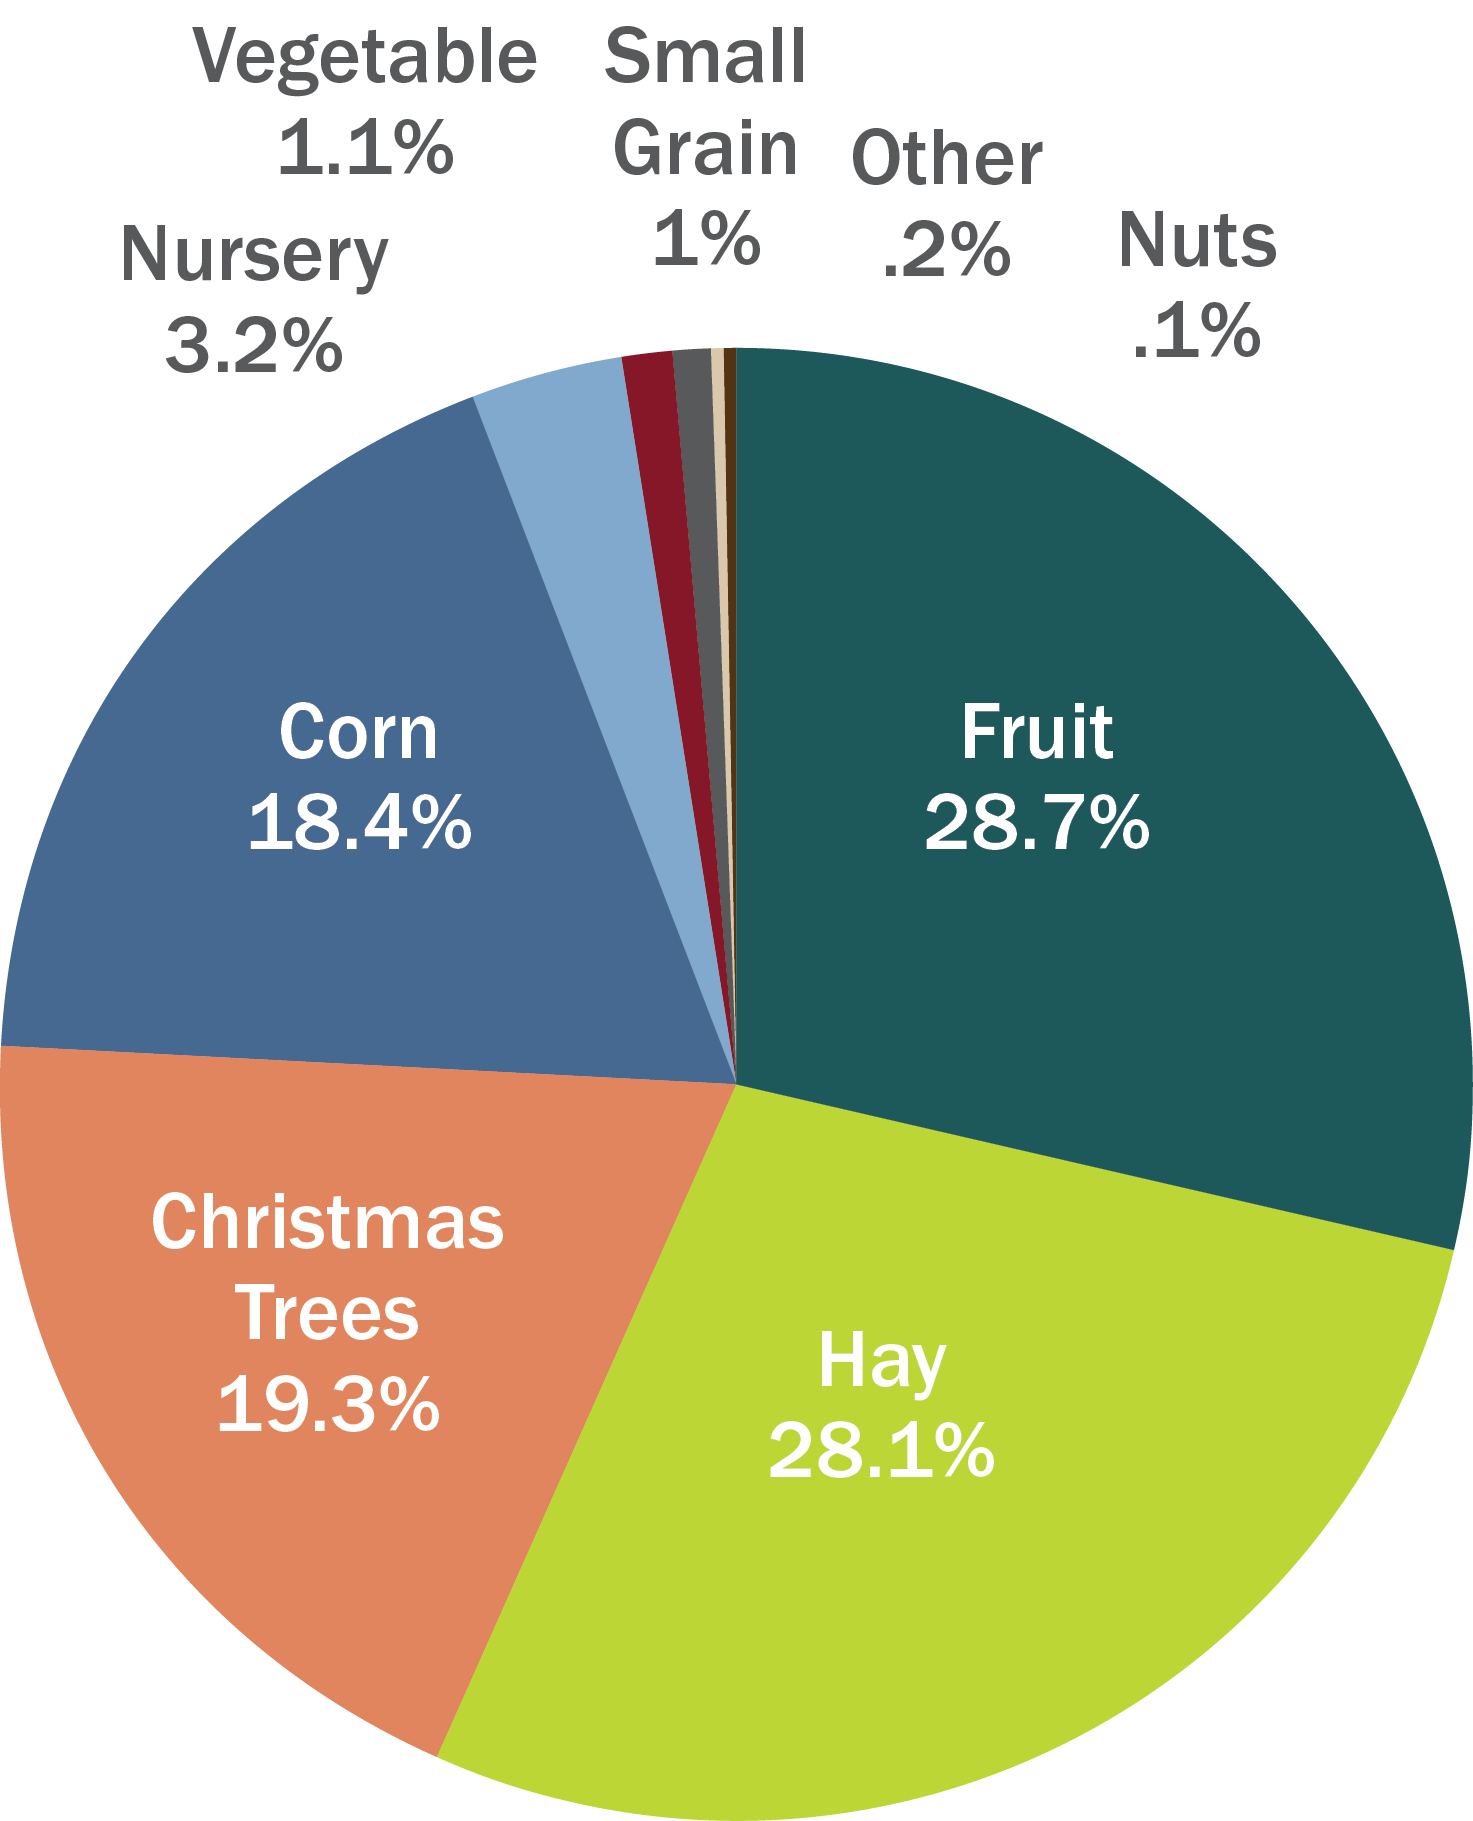 Hay accounts for 28.1% of agricultural crops, fruit 28.7%, Christmas trees 19.3%, corn 18.4%, plus vegetables, nuts, grains and nursery plants.